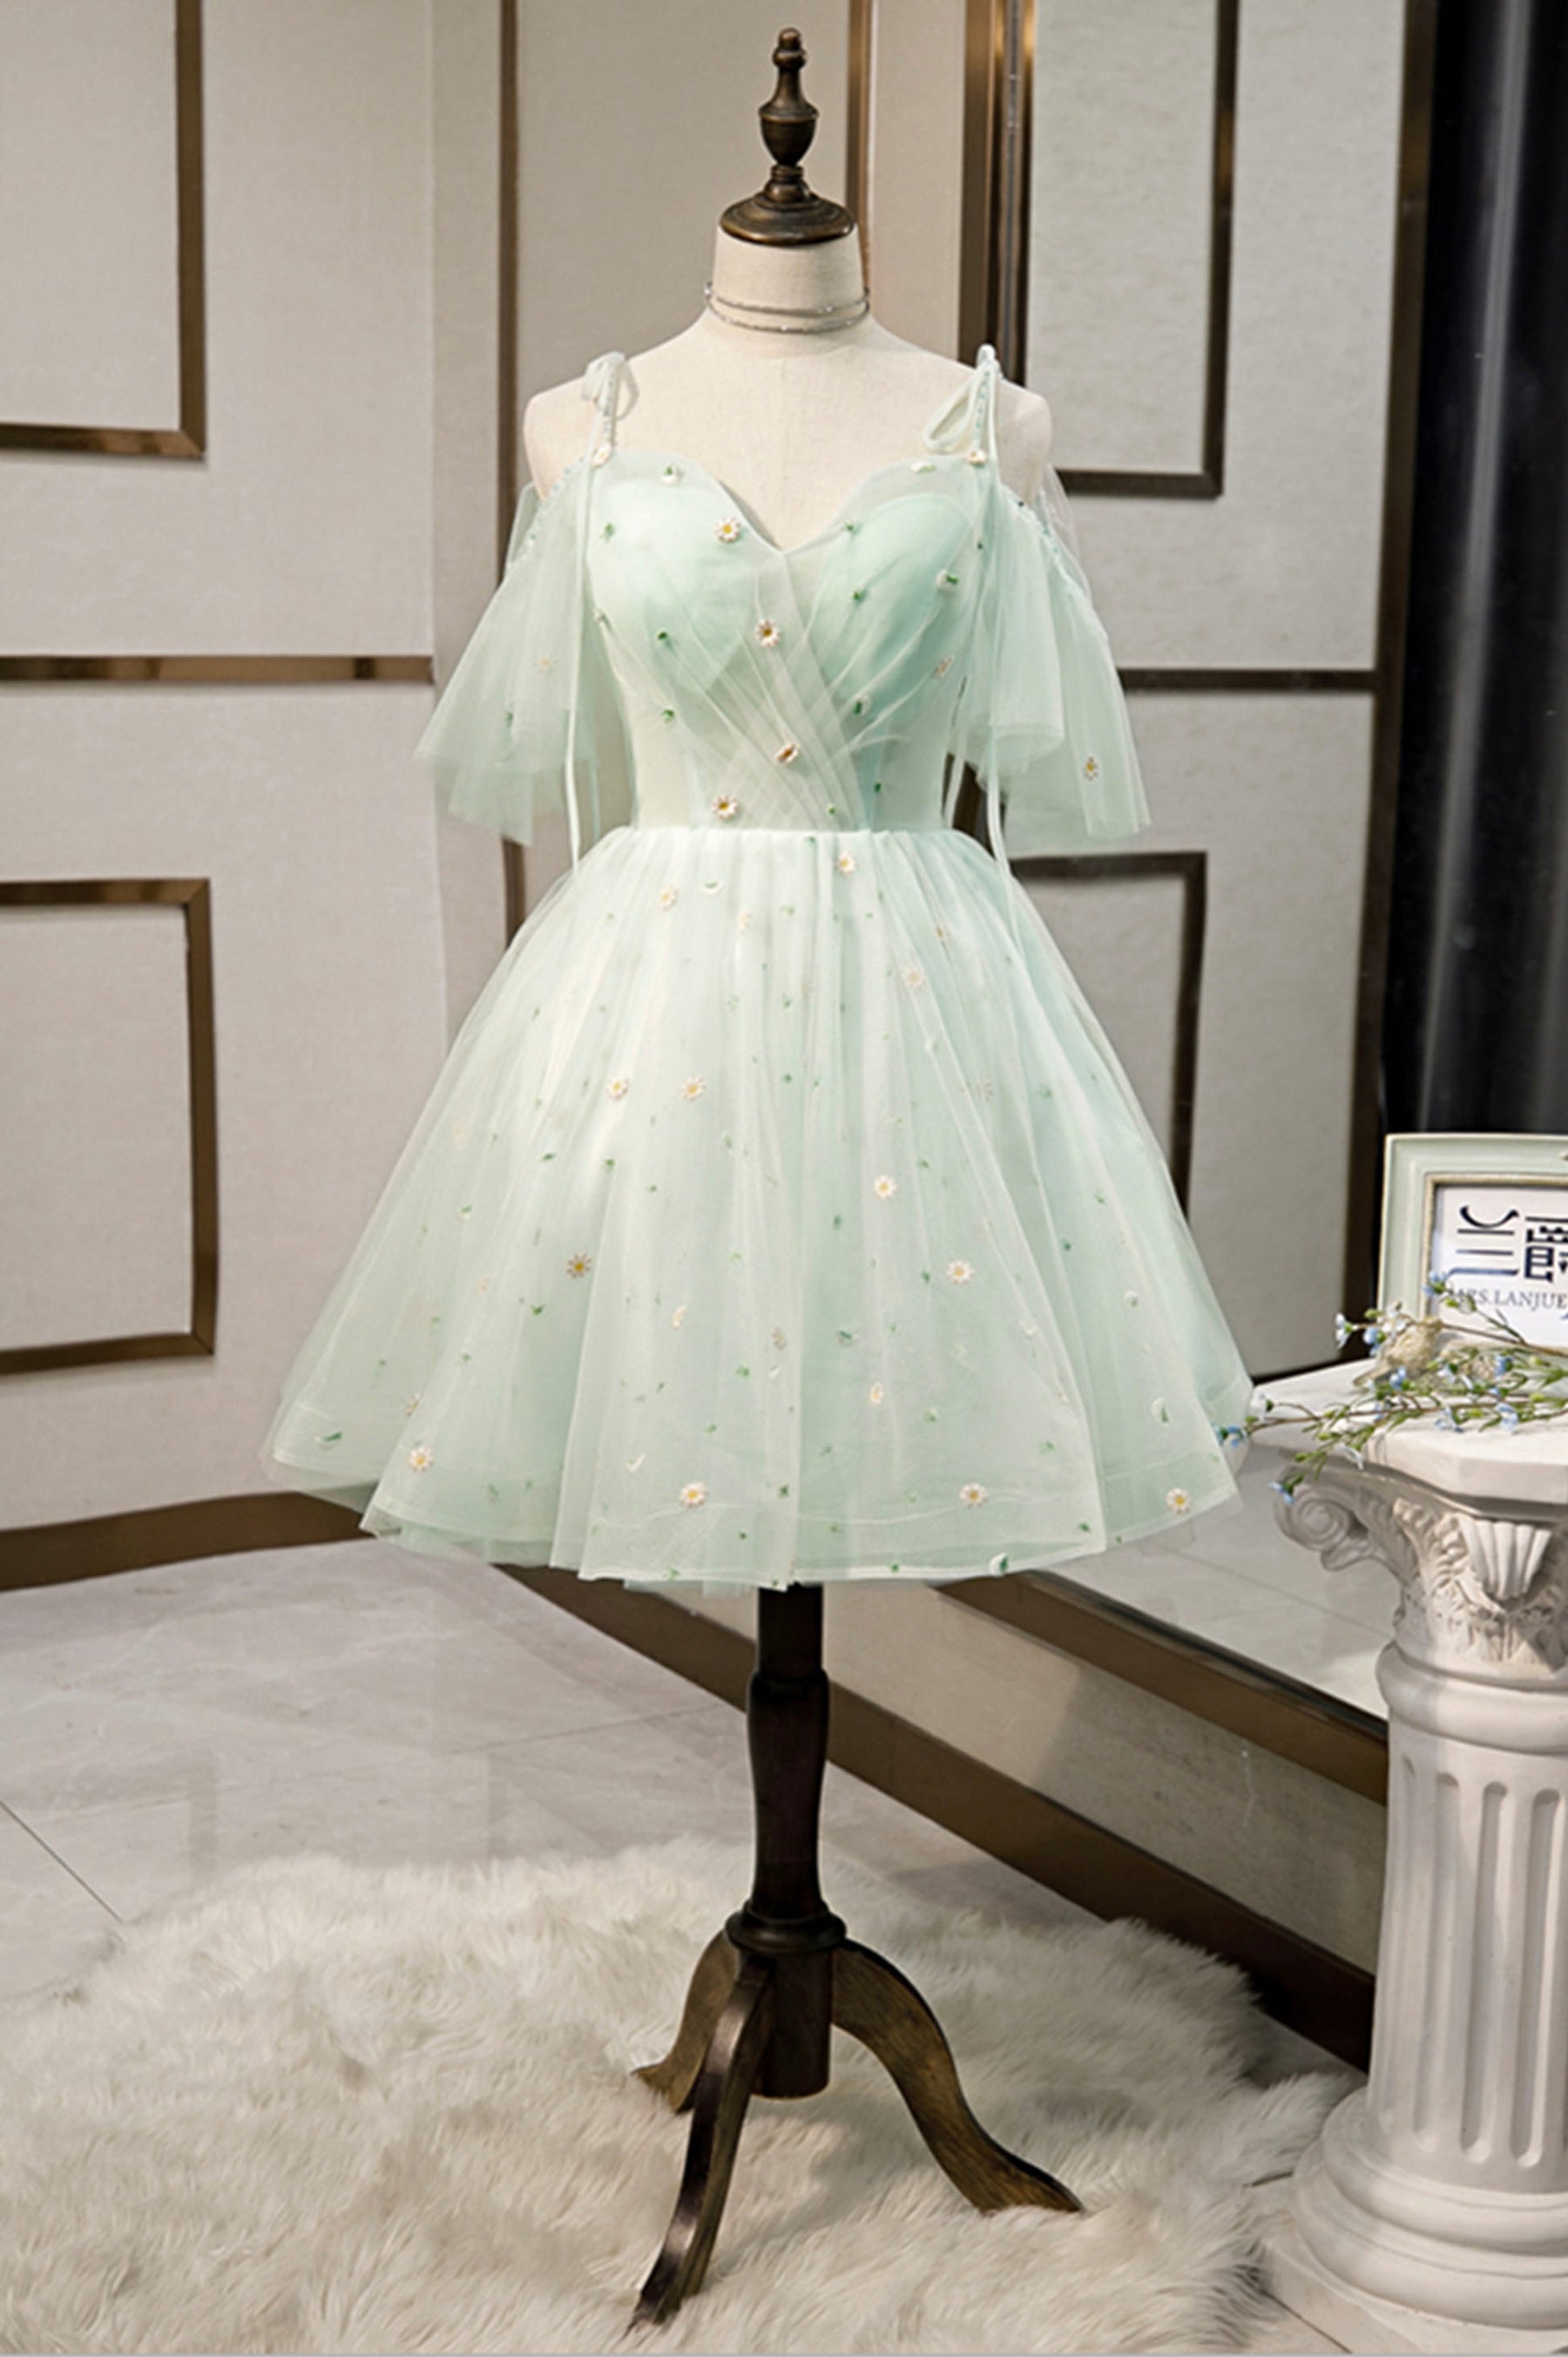 Short Prom Dresses Sexy Mint Green Homecoming Dress For Junior Birthday  Chiffon Dress · Dresscomeon · Online Store Powered by Storenvy